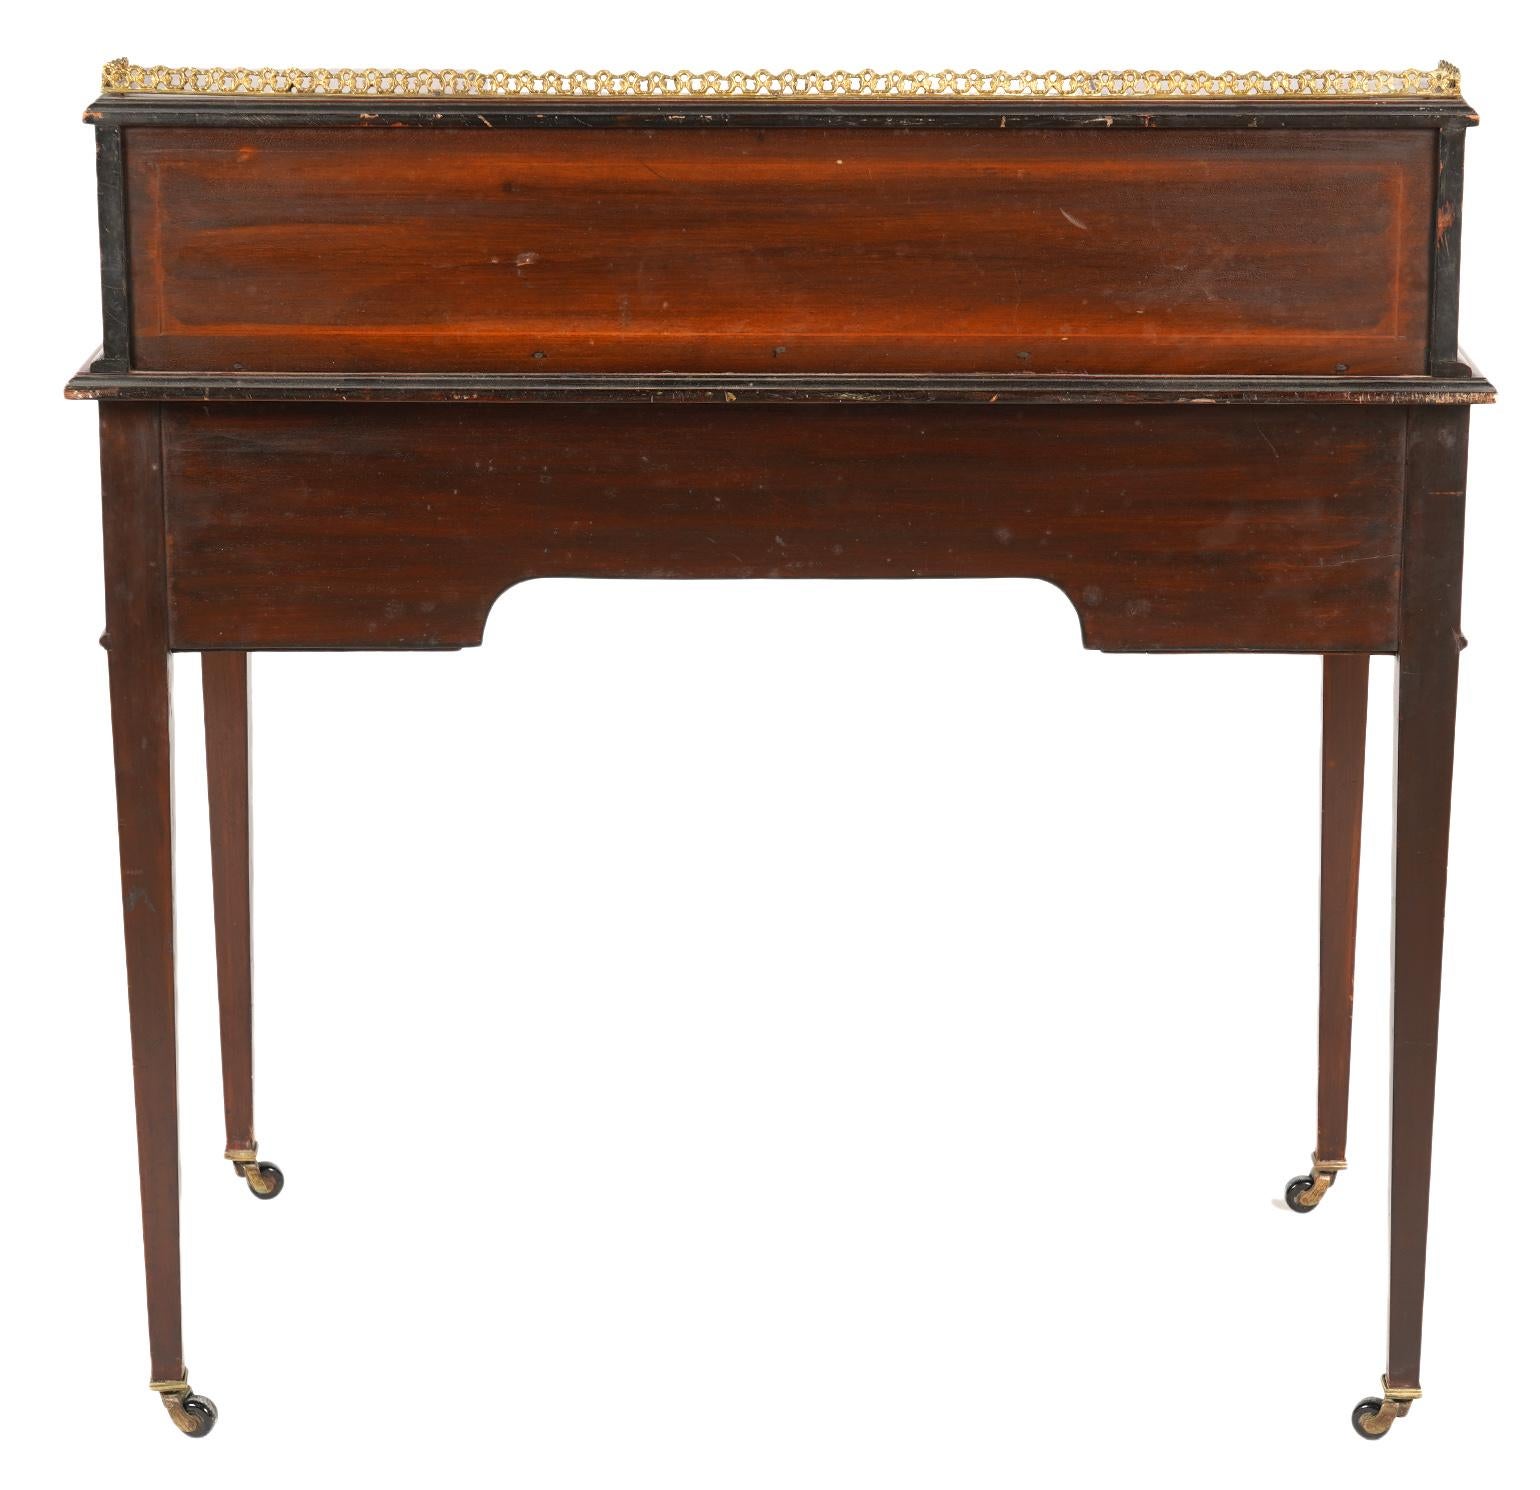 English Edwardian Inlaid Mahogany Bow Front Ladies Writing Desk with Gallery 2